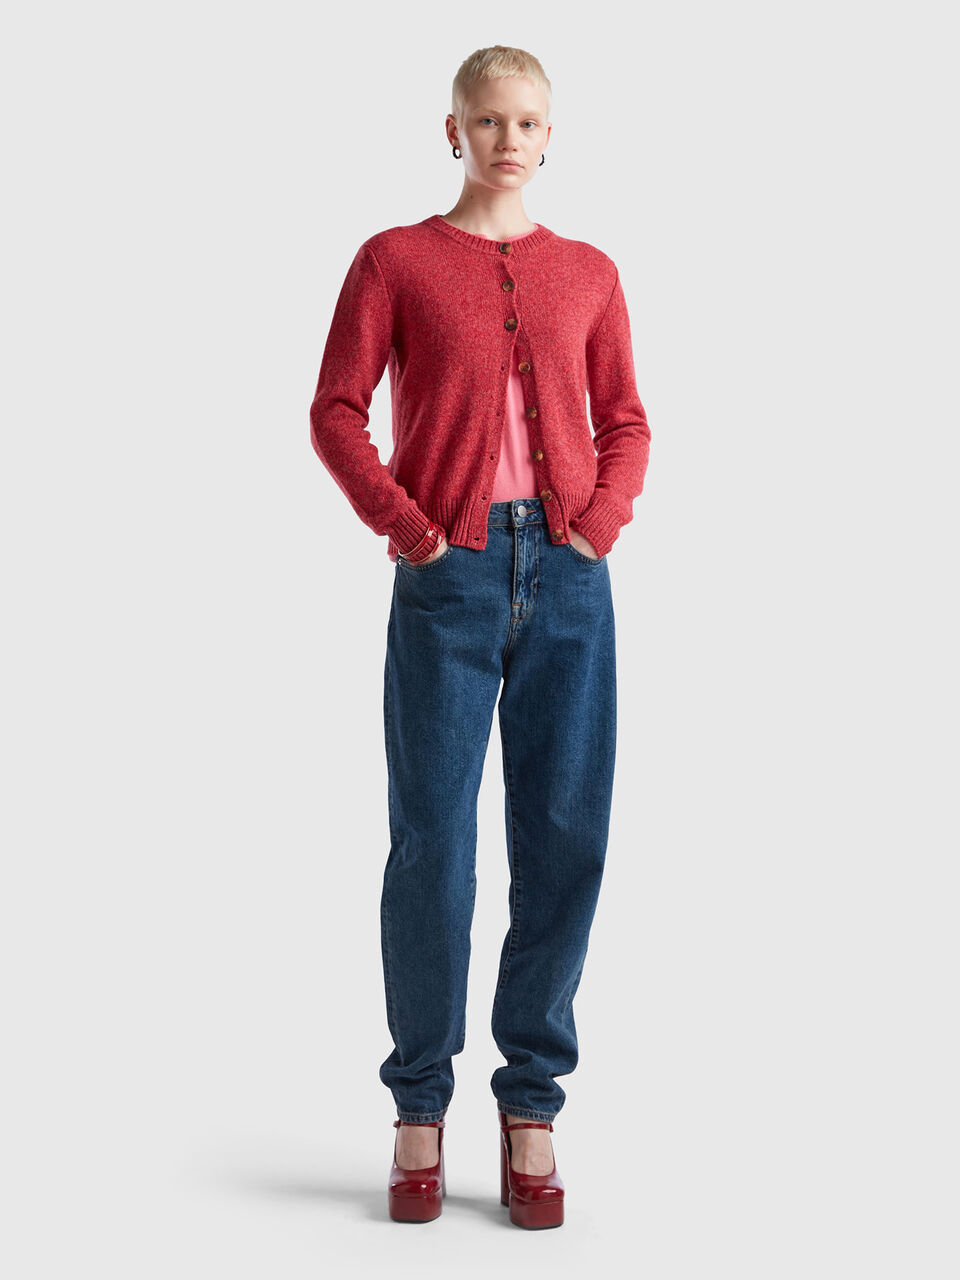 Cardigan in pure Shetland wool - Red Coral | Benetton